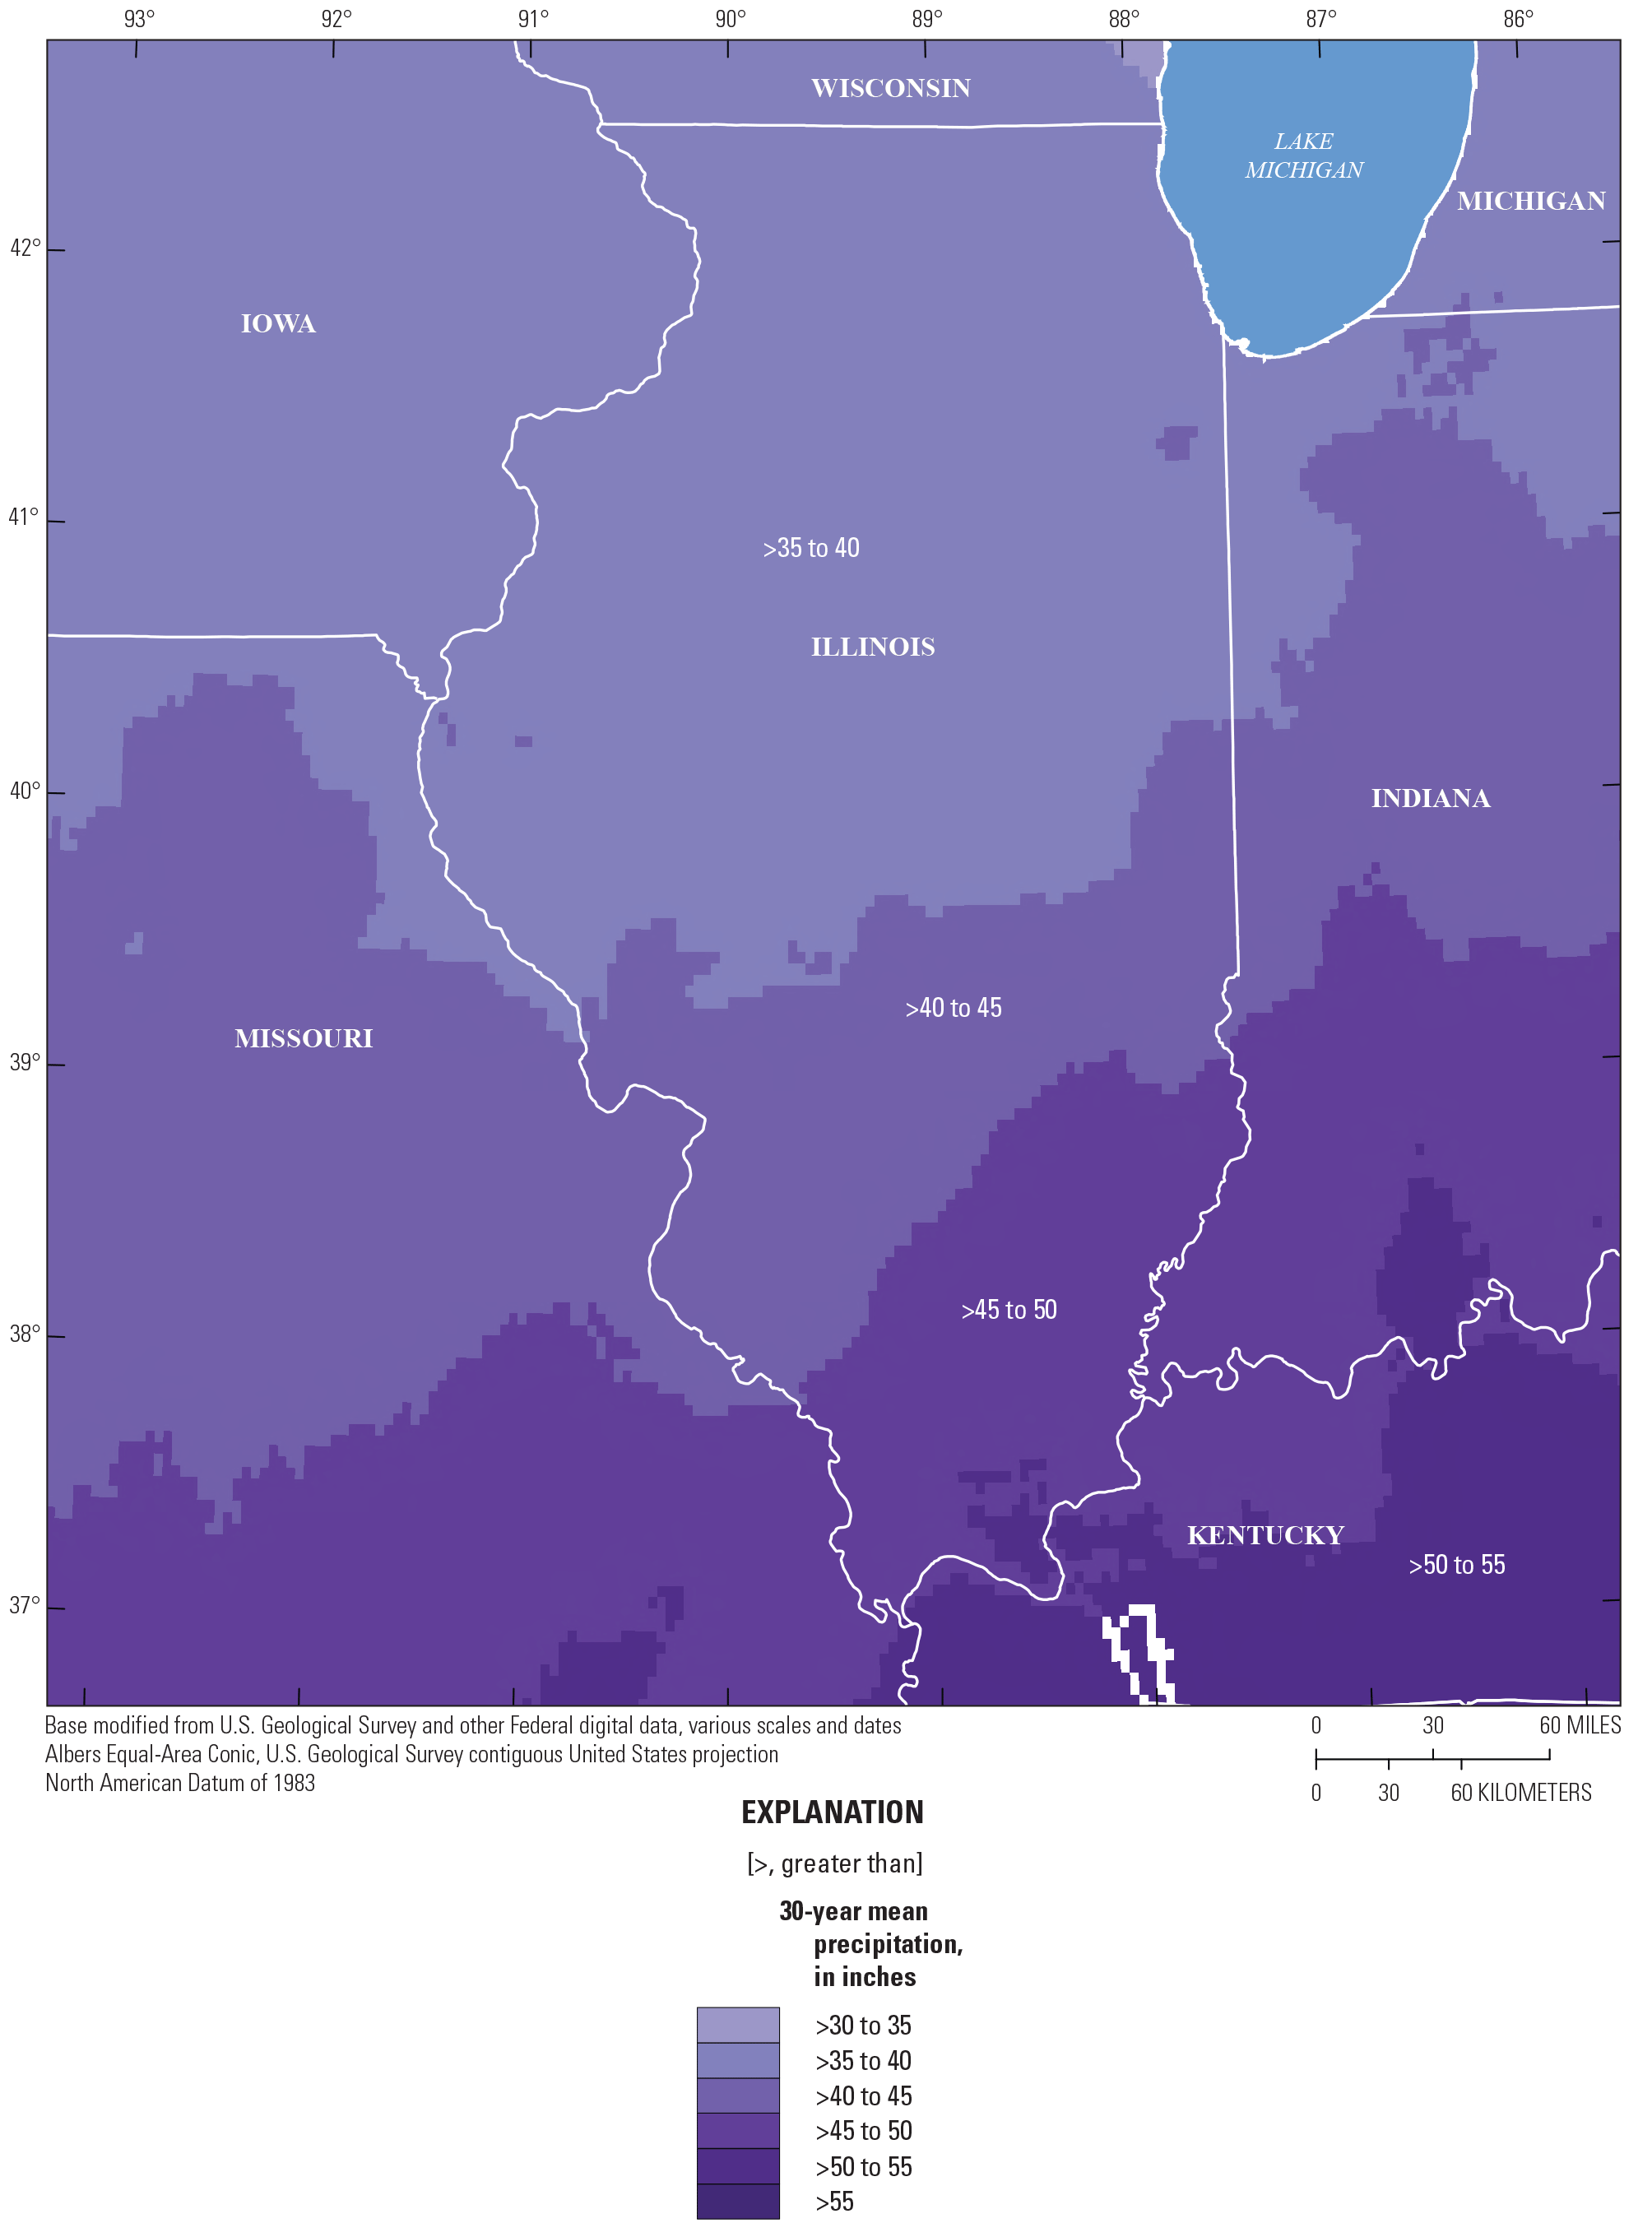 30-year mean annual precipitation in Illinois, which increases towards the south.